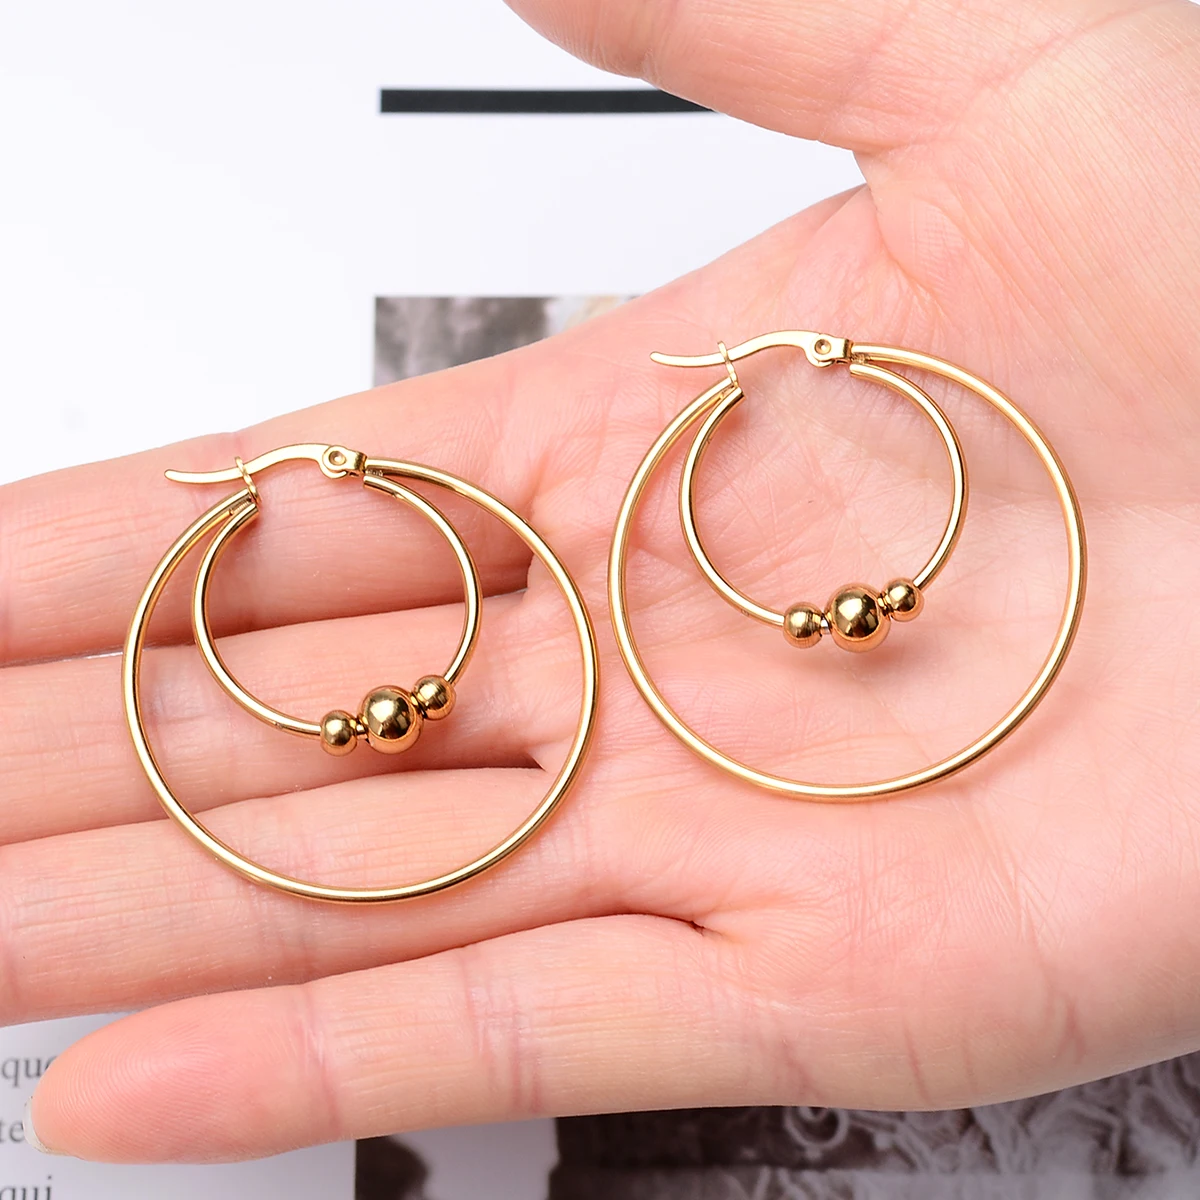 

Stainless Steel Earrings Hoops With Ball Earing Double Layer Different Circle Round Gold Big Large Thick Hoop Earring